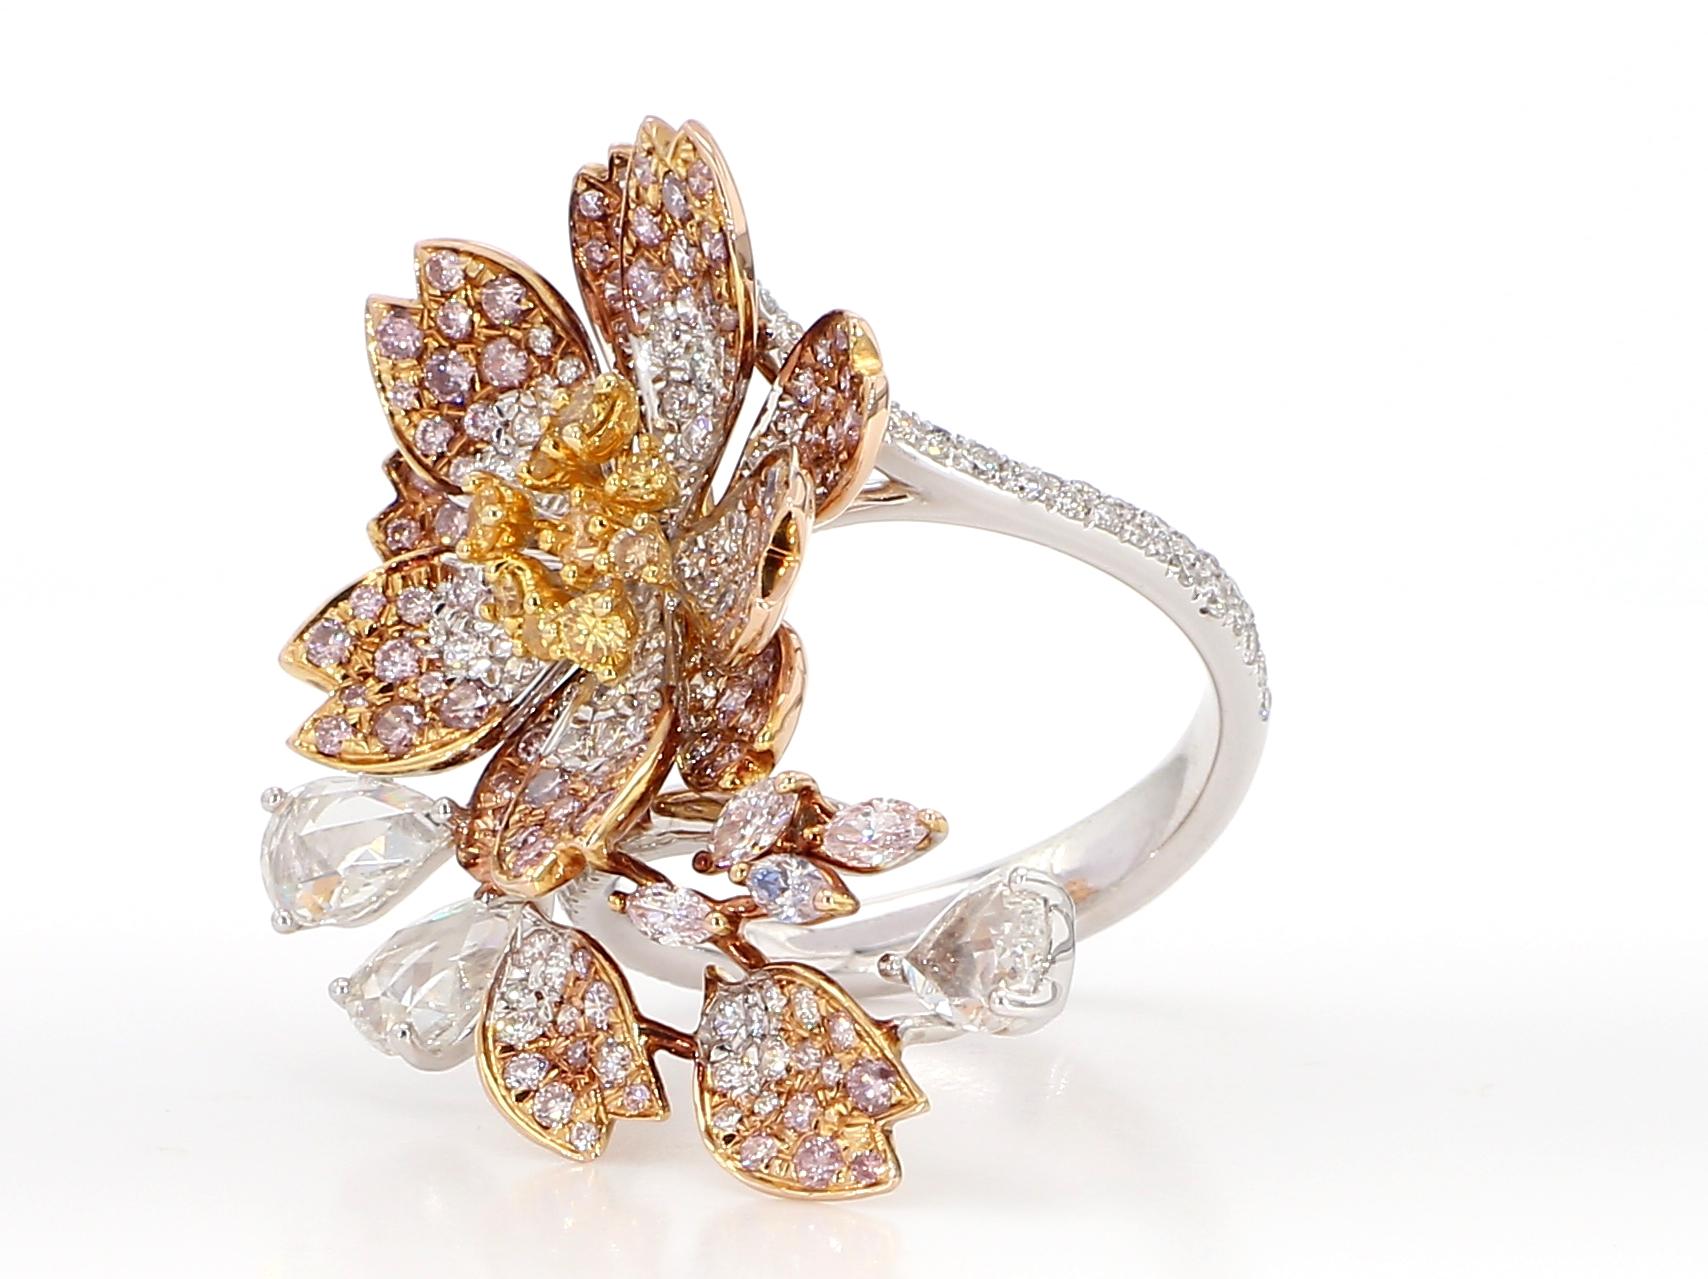 2.67 Carat Pink and Yellow Diamonds, Cocktail Ring, Floral Motif, 18K Rose Gold. For Sale 3